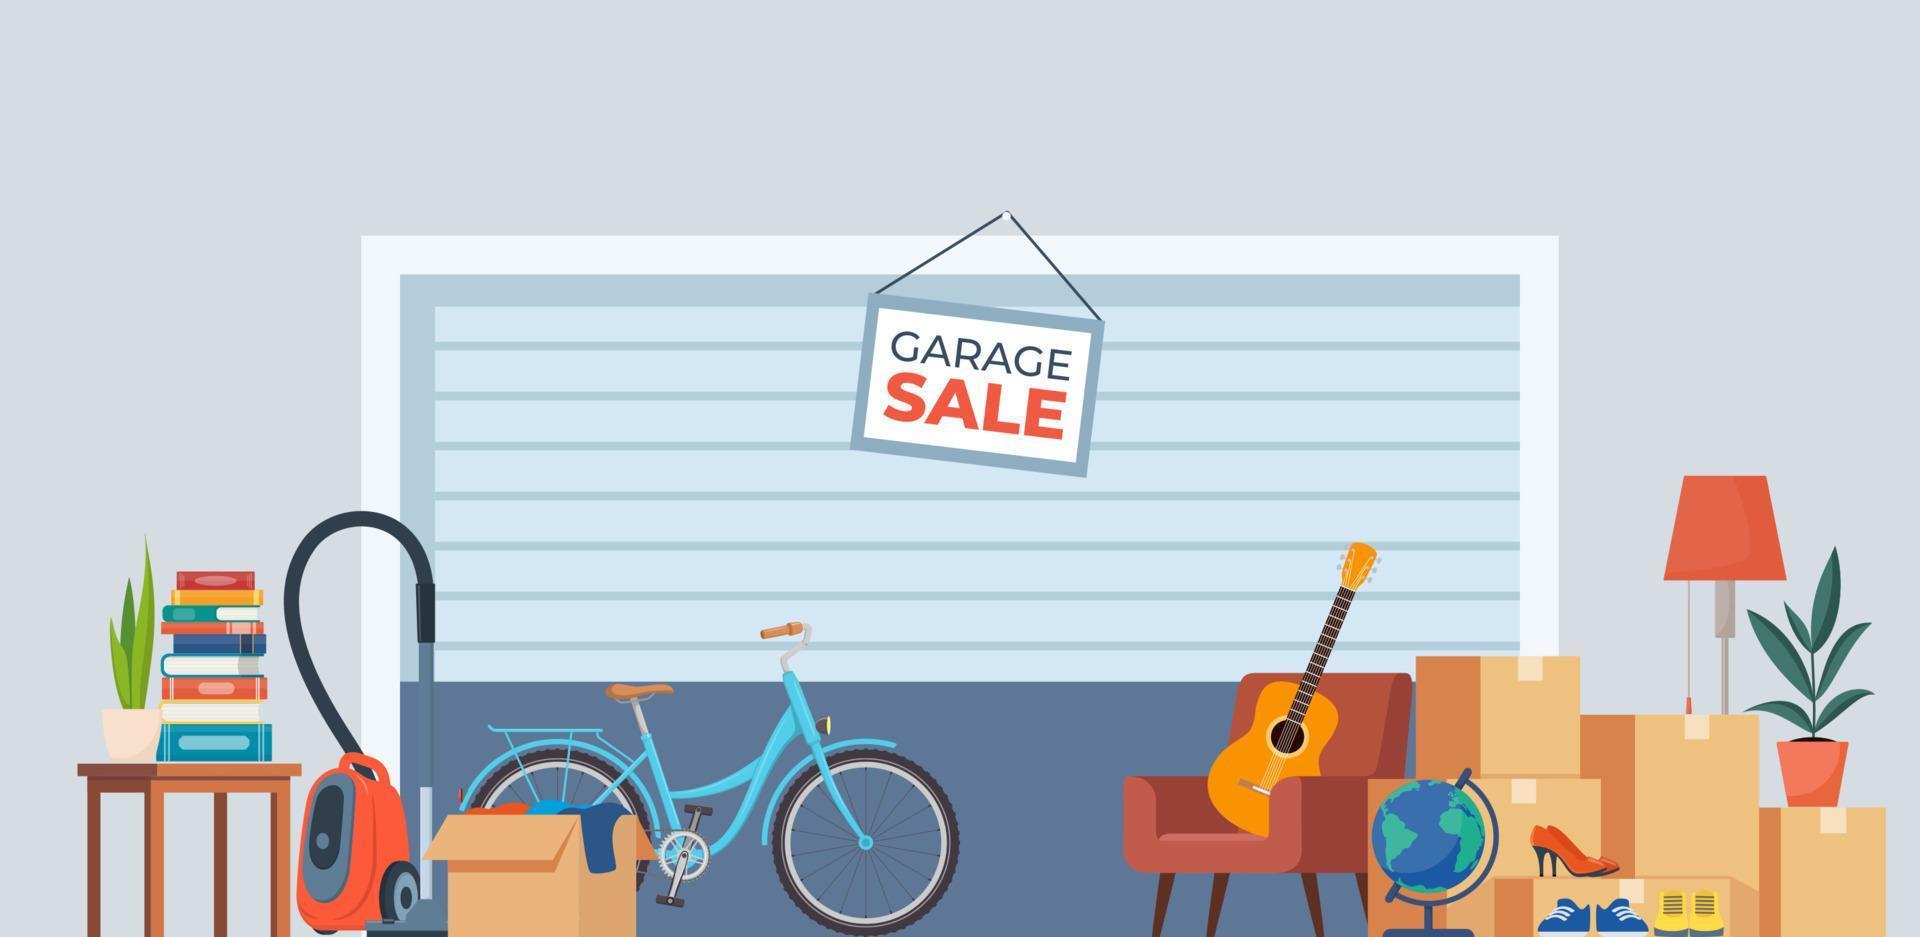 Garage sale background with furniture and accessory. House plants, guitar, books, clothes, chair and others. Flea market old stuff clutter. Vector illustration.